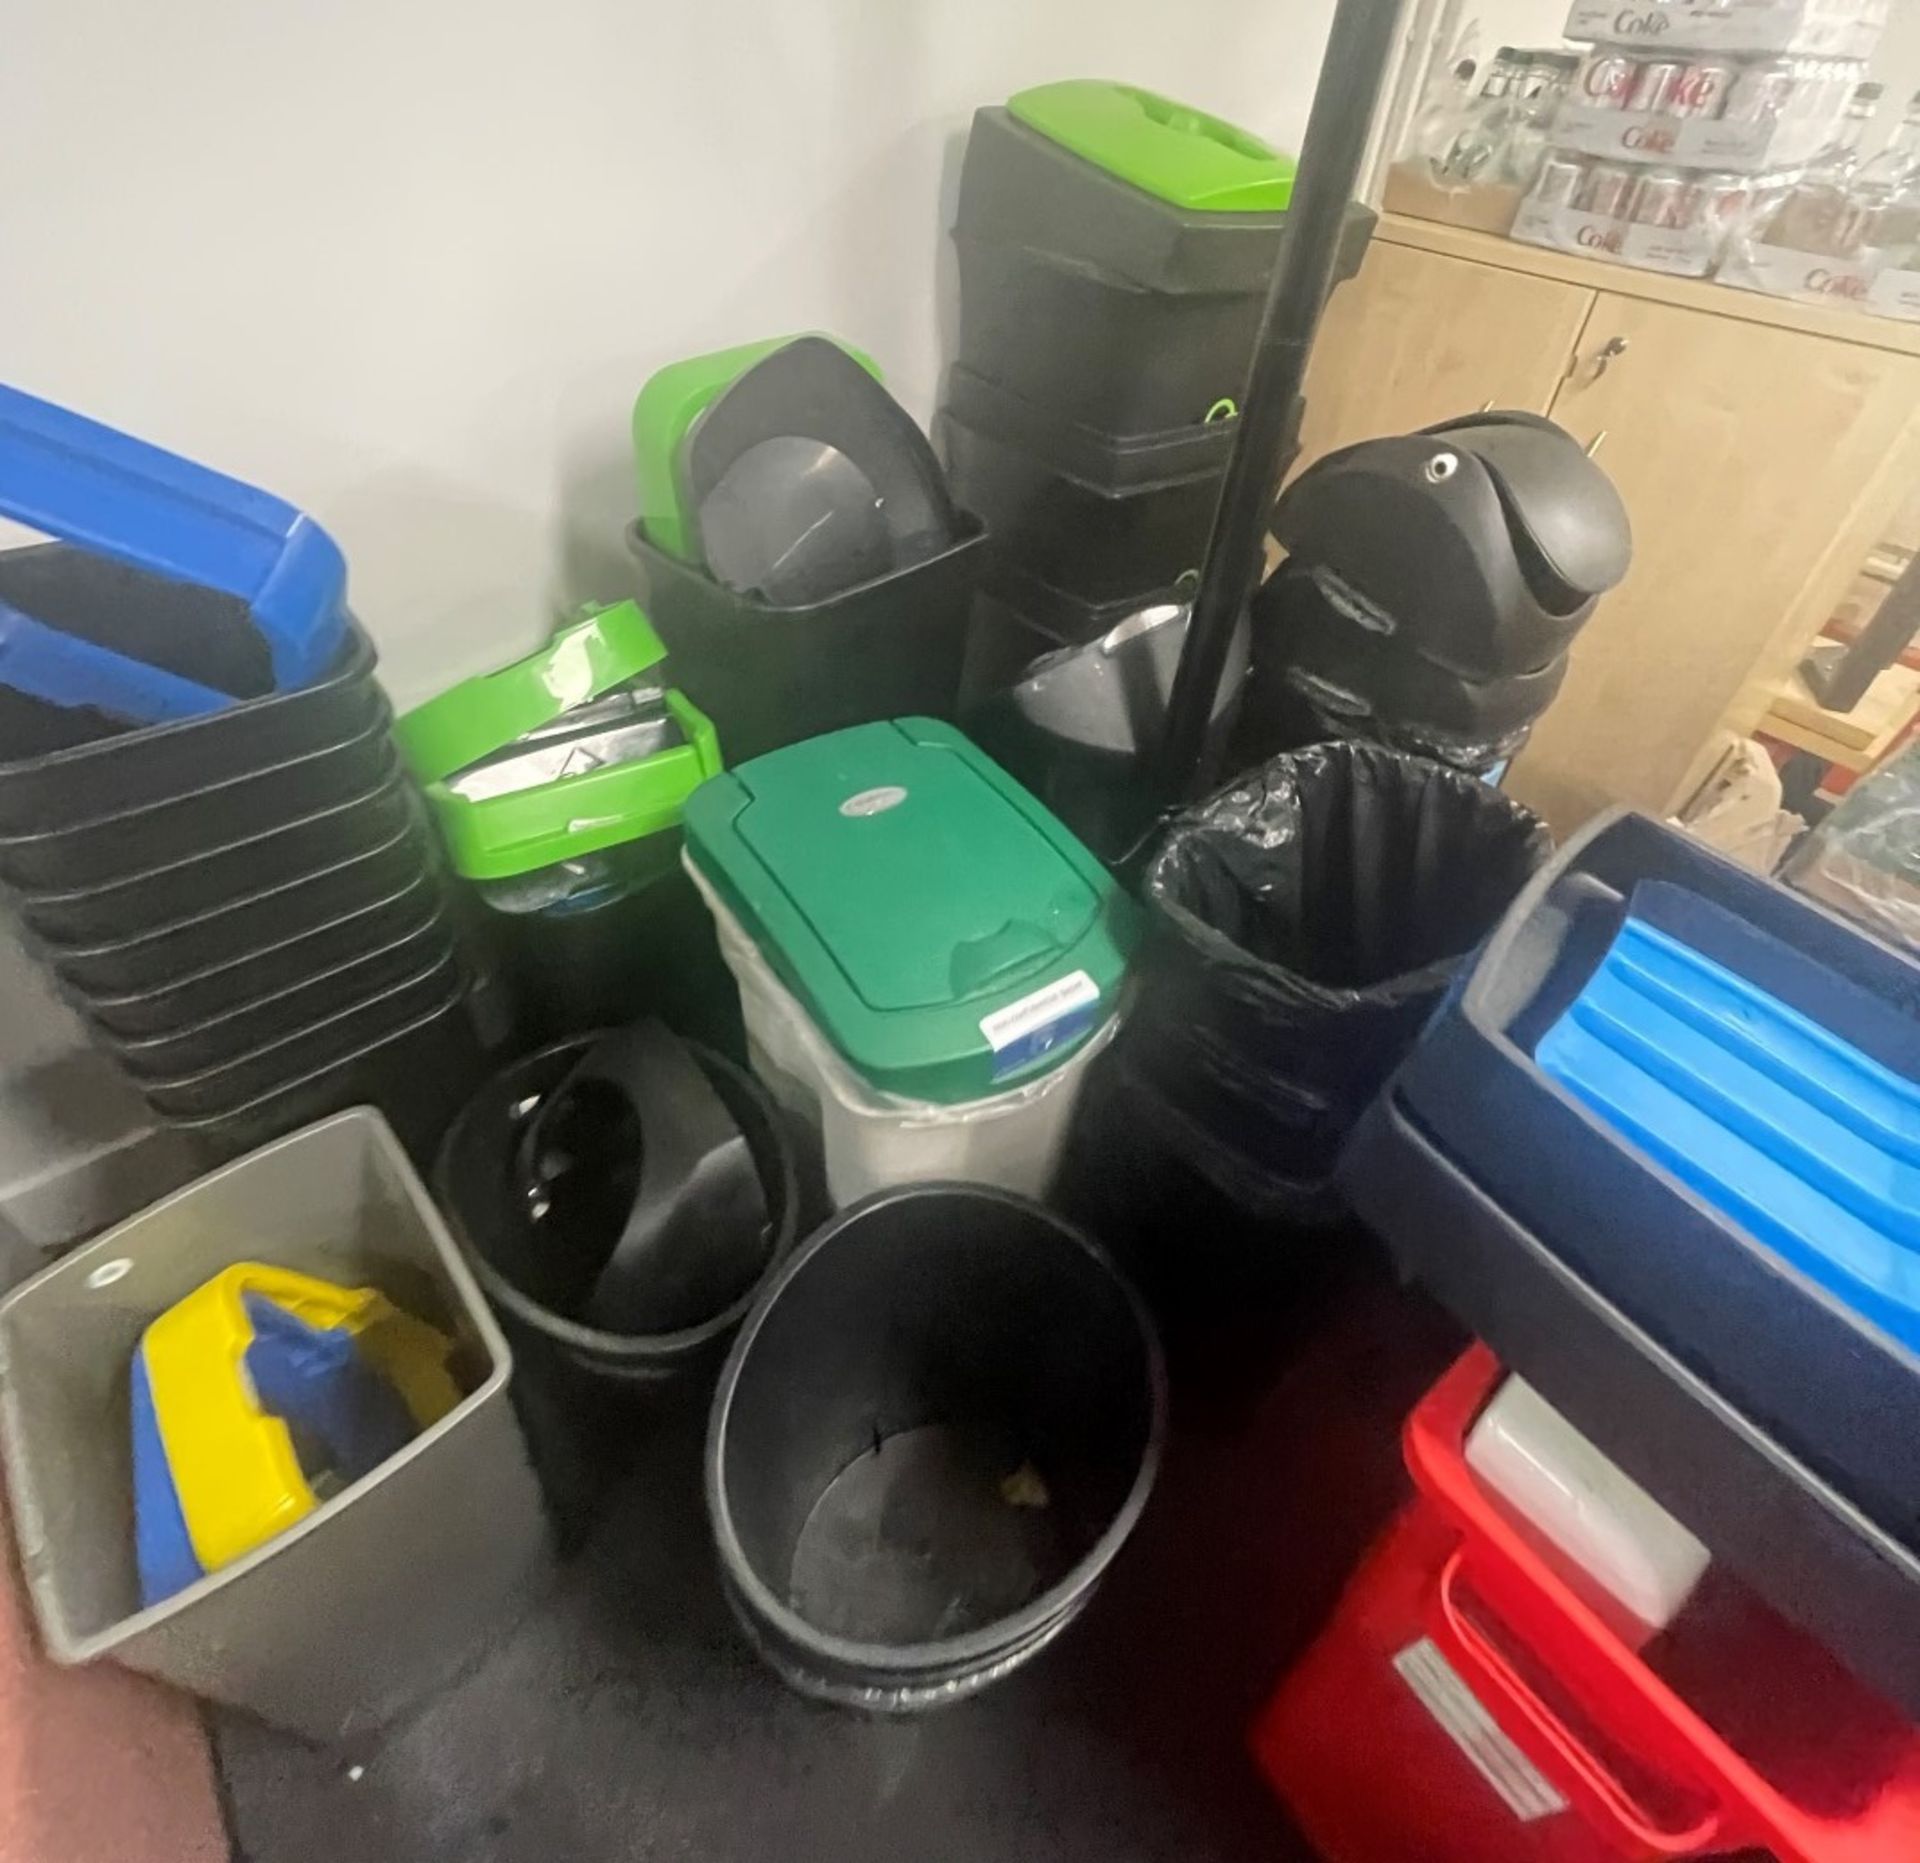 Job Lot of Approximately 73 x Recycling / Bins - To Be Removed From An Executive Office Environment - Image 14 of 15